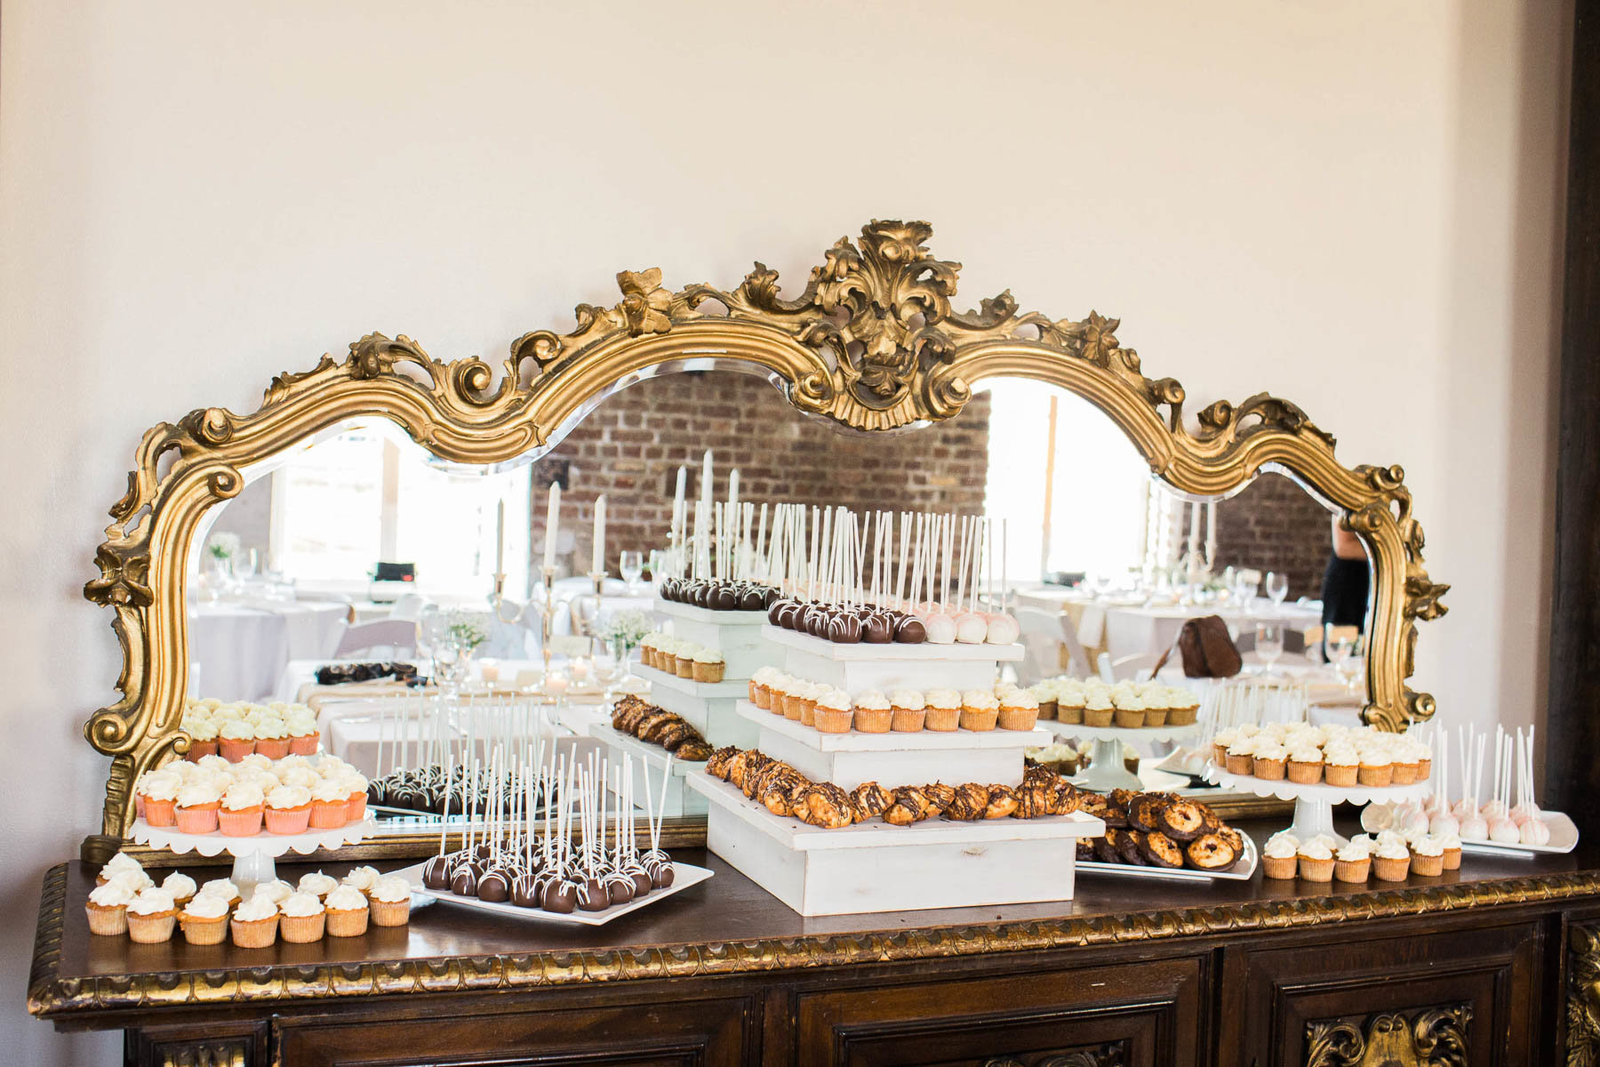 Baked goods are laid out on dessert table, Rice Mill Building, Charleston, South Carolina